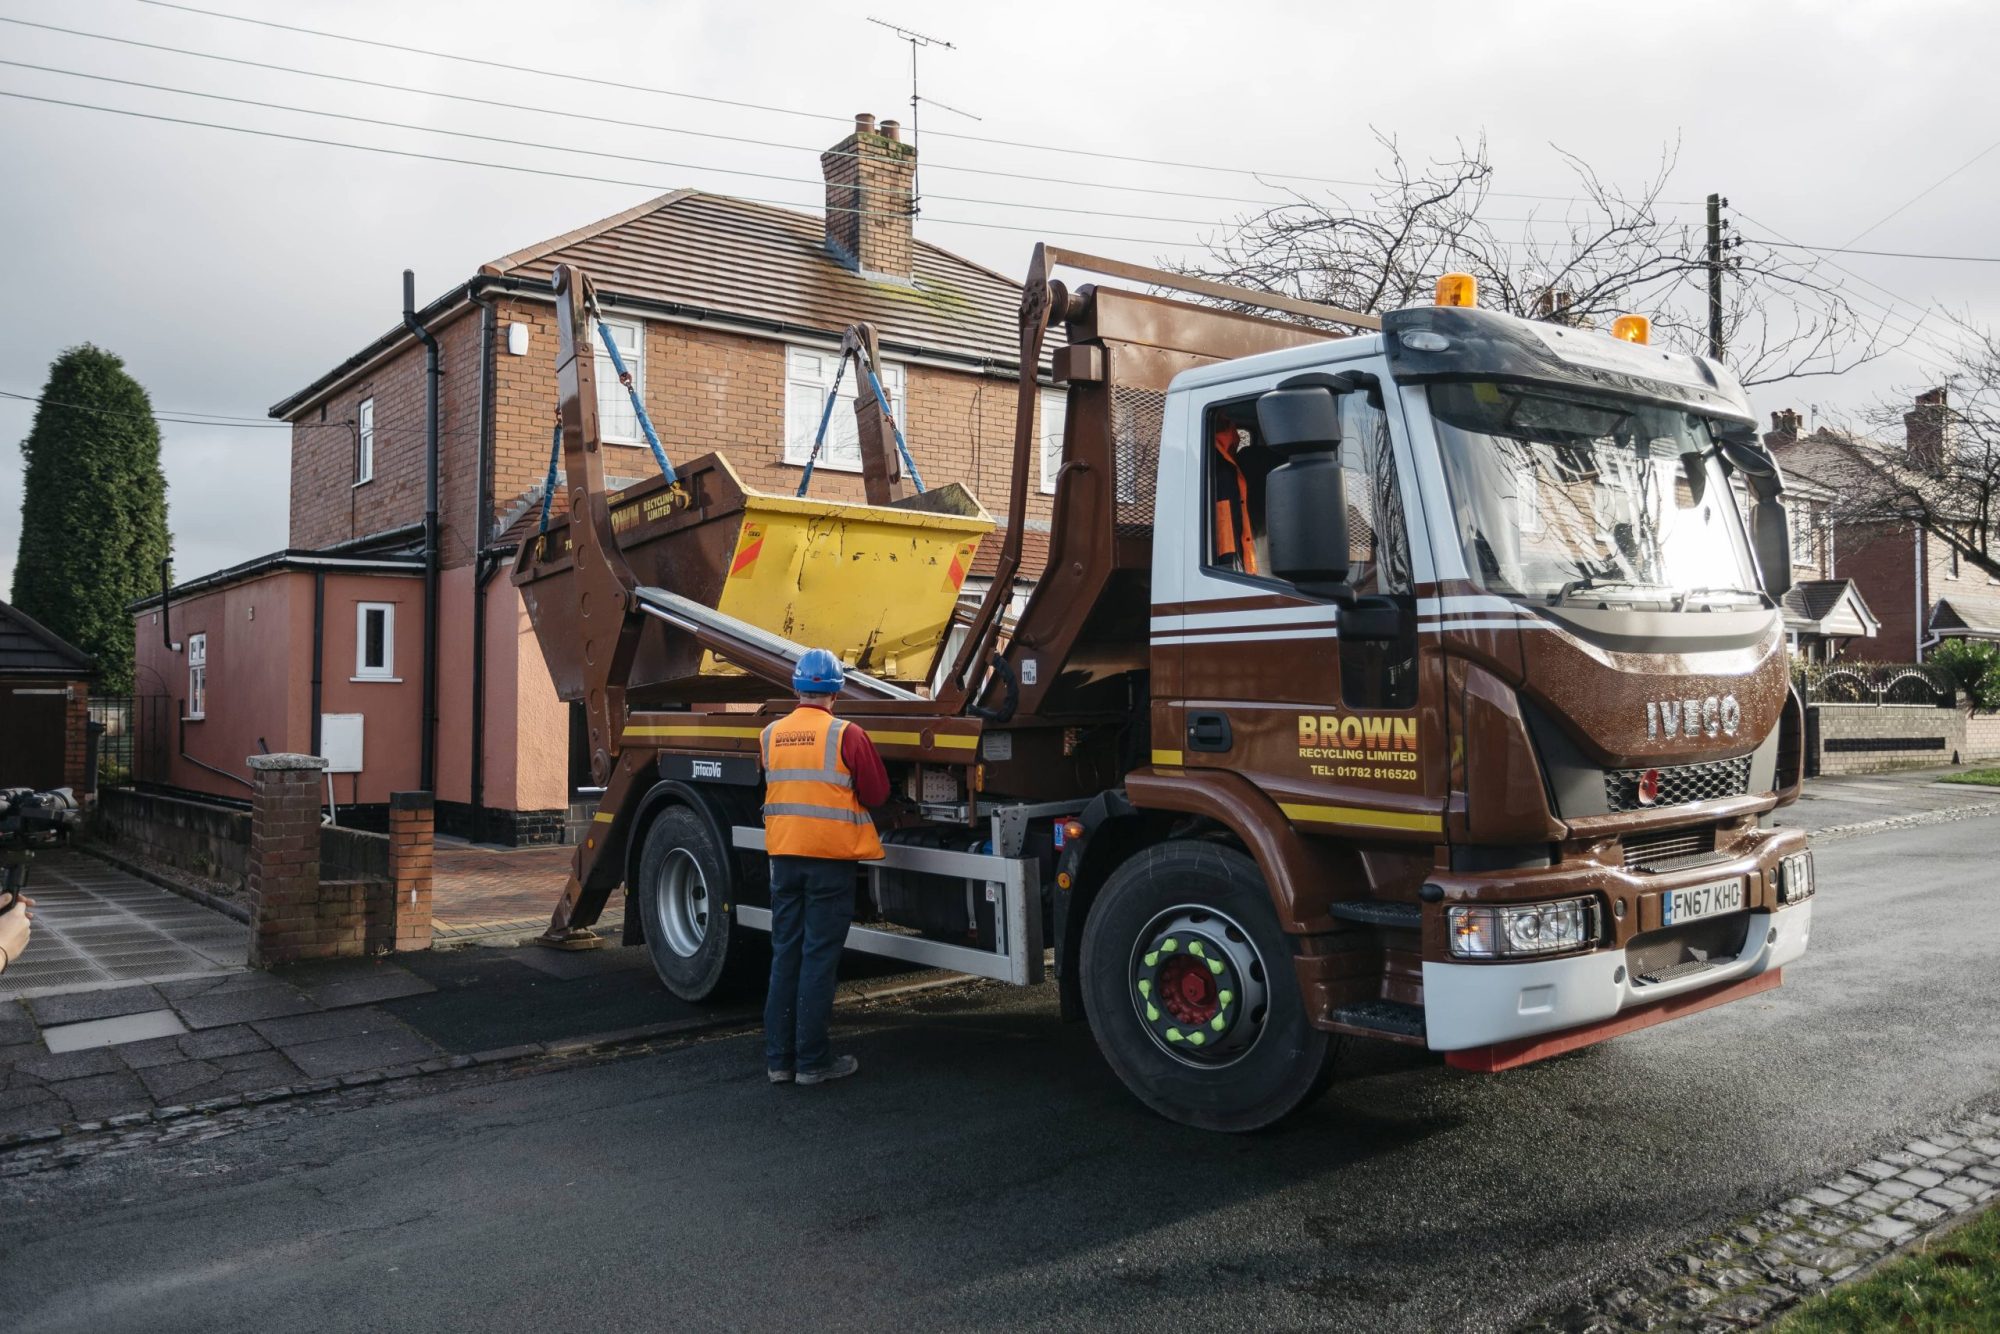 Brown Recycling truck builders skips hire